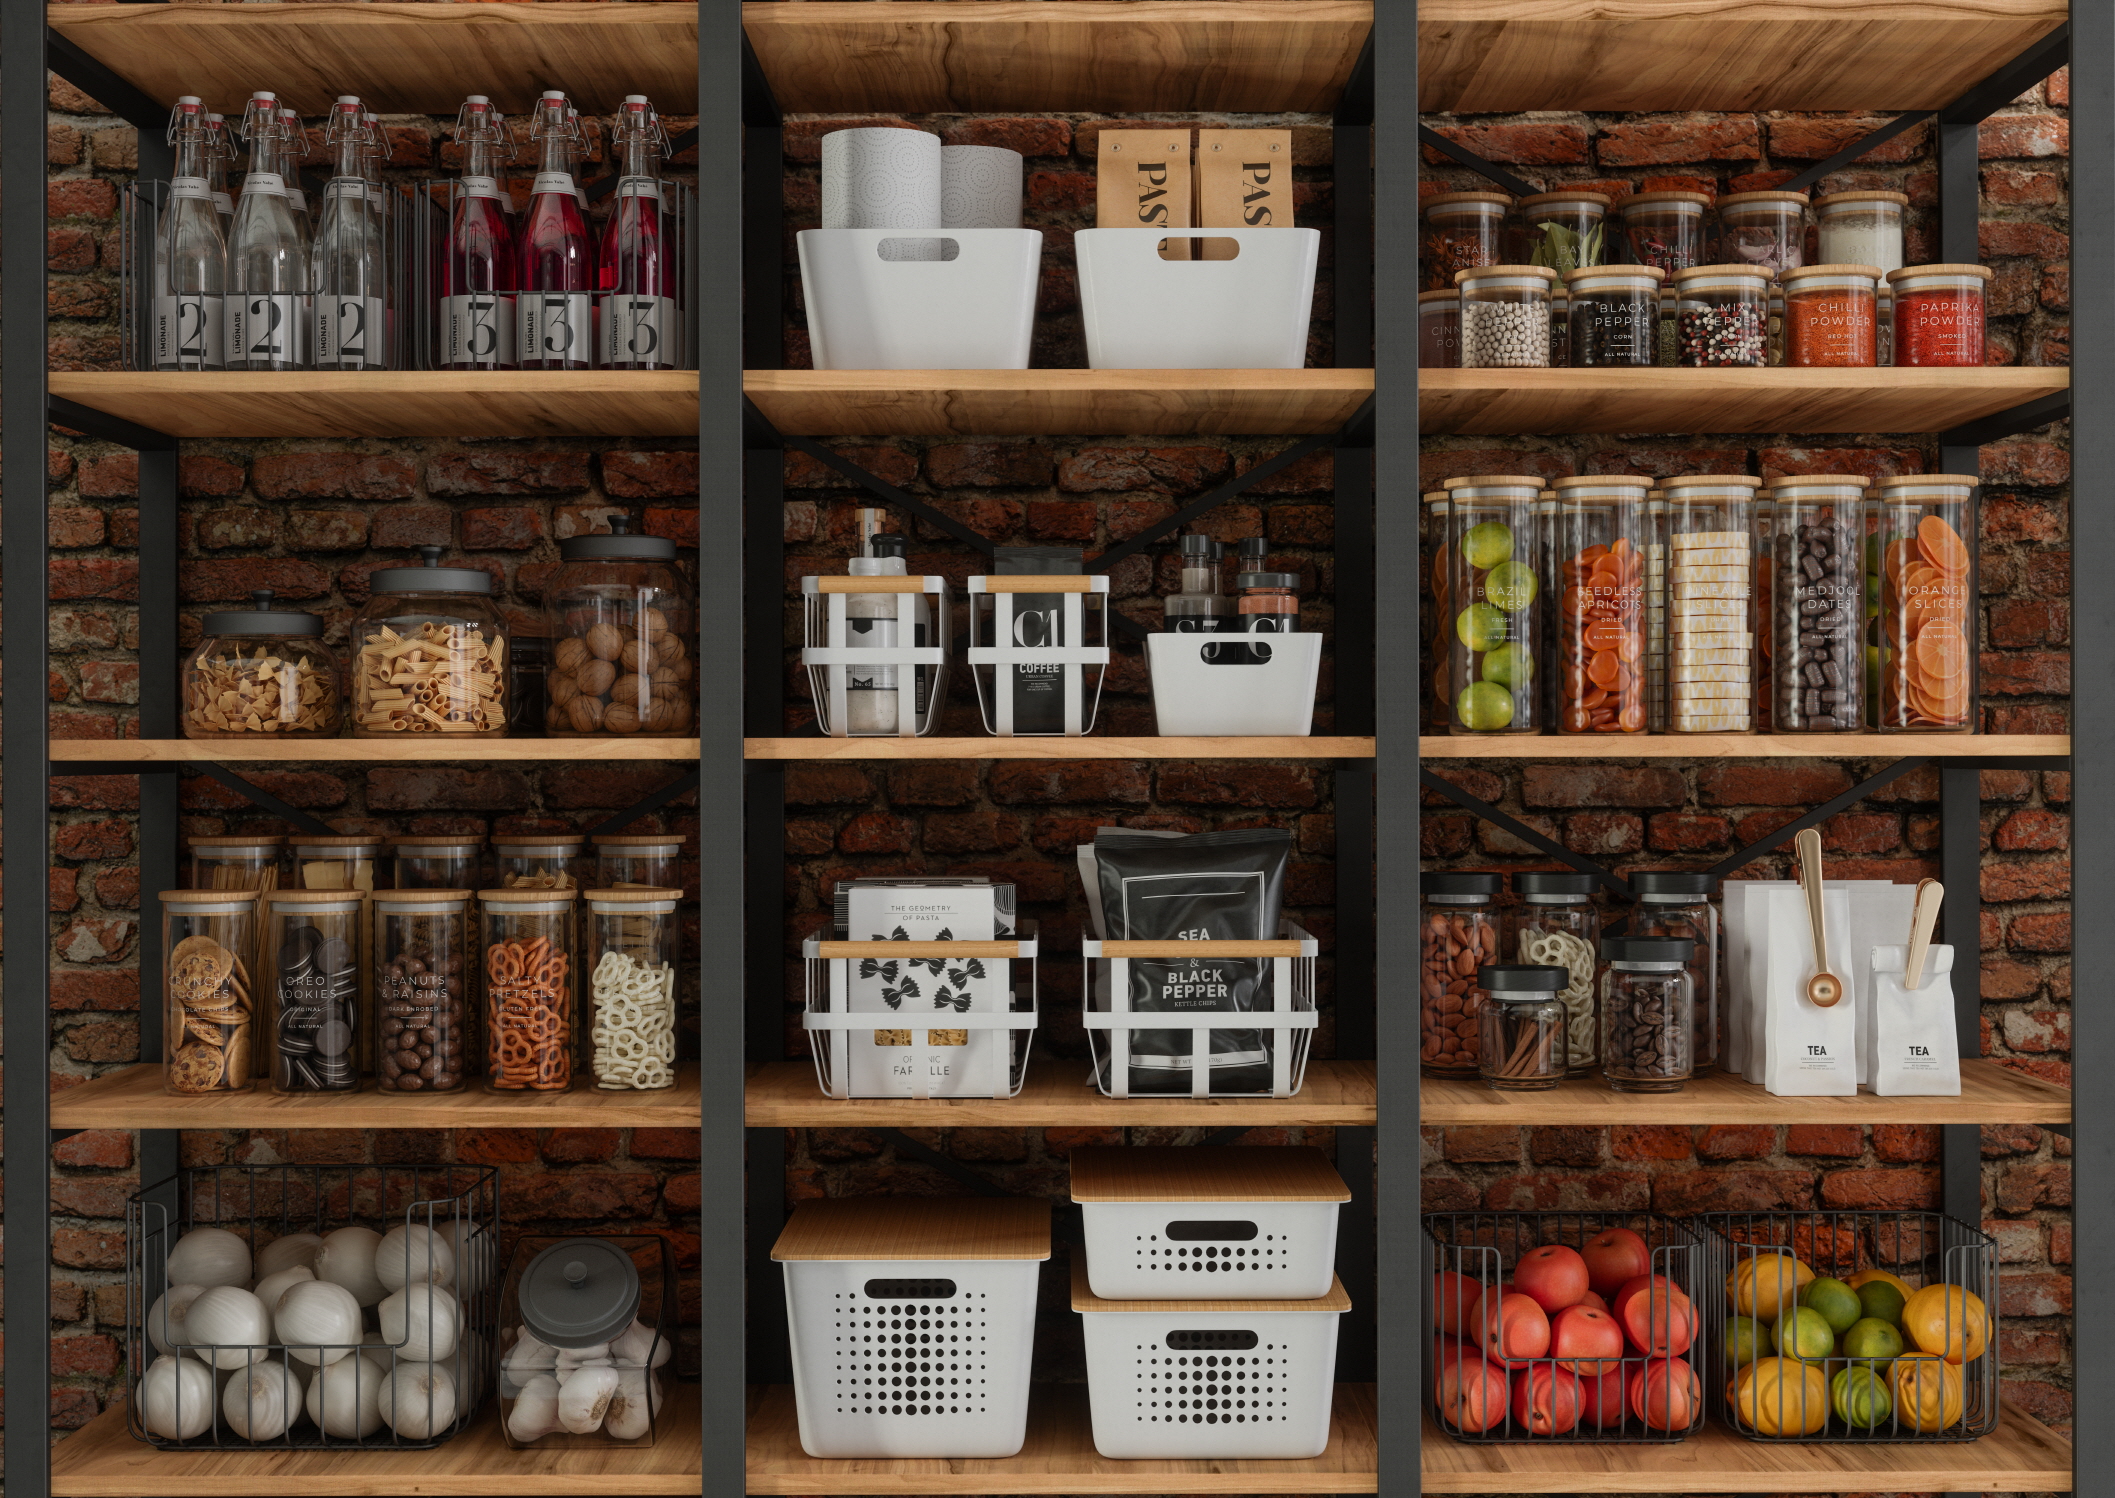 Clear bins and containers make shelves neat and contents easily visible.